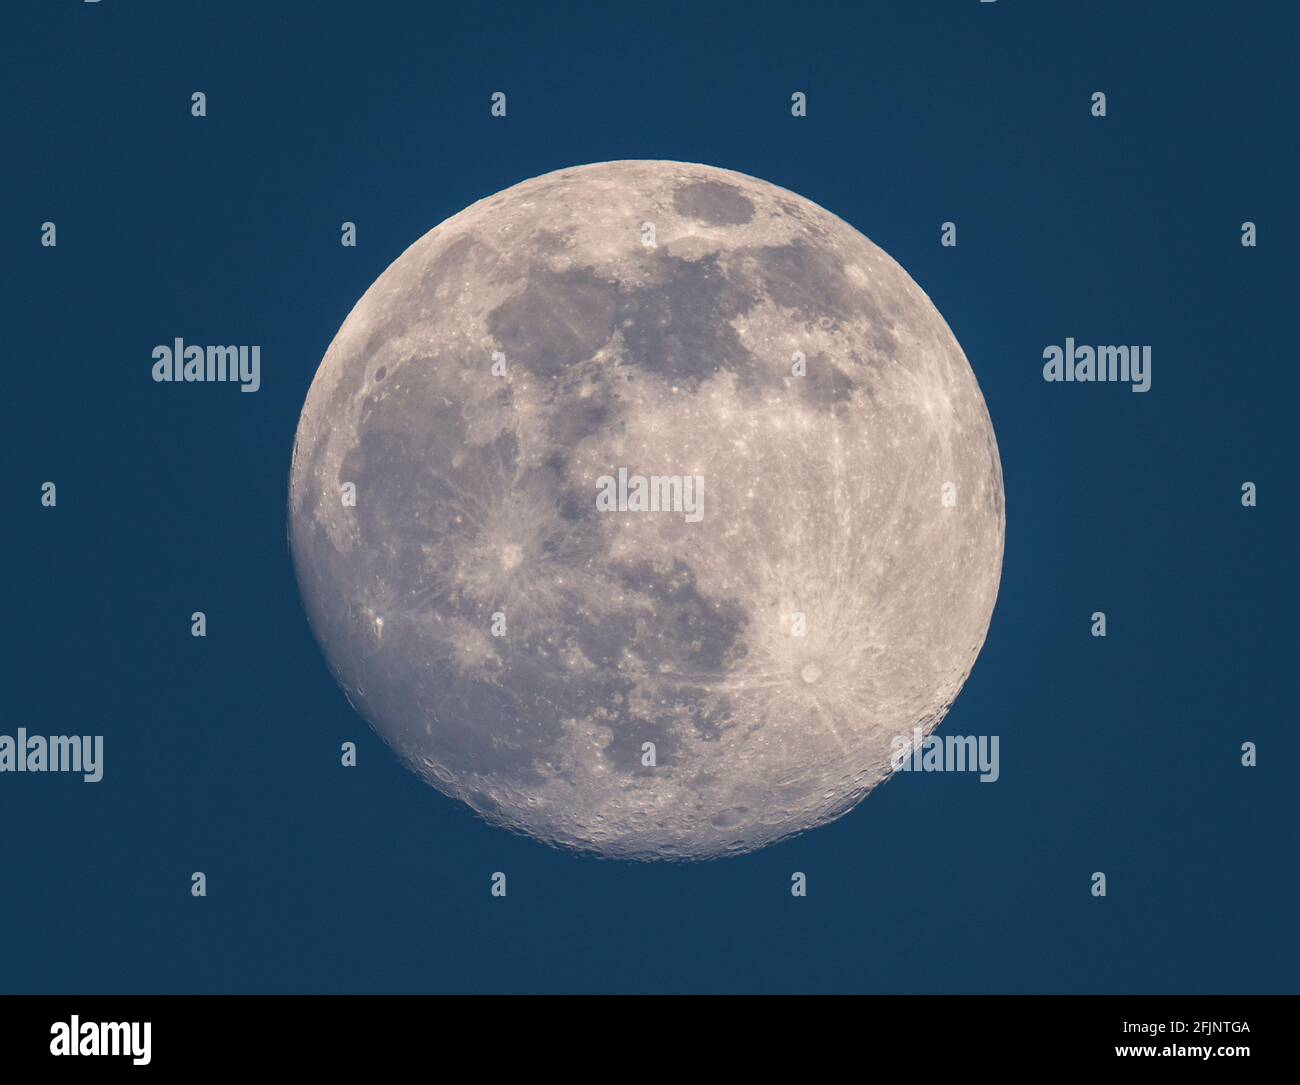 London, UK. 25 April 2021. 96% illuminated waxing gibbous Moon in blue mid-evening sky. The next full Moon from the UK is 4.31am on 27 April 2021, known as the Pink Moon. Credit: Malcolm Park/Alamy Live News. Stock Photo